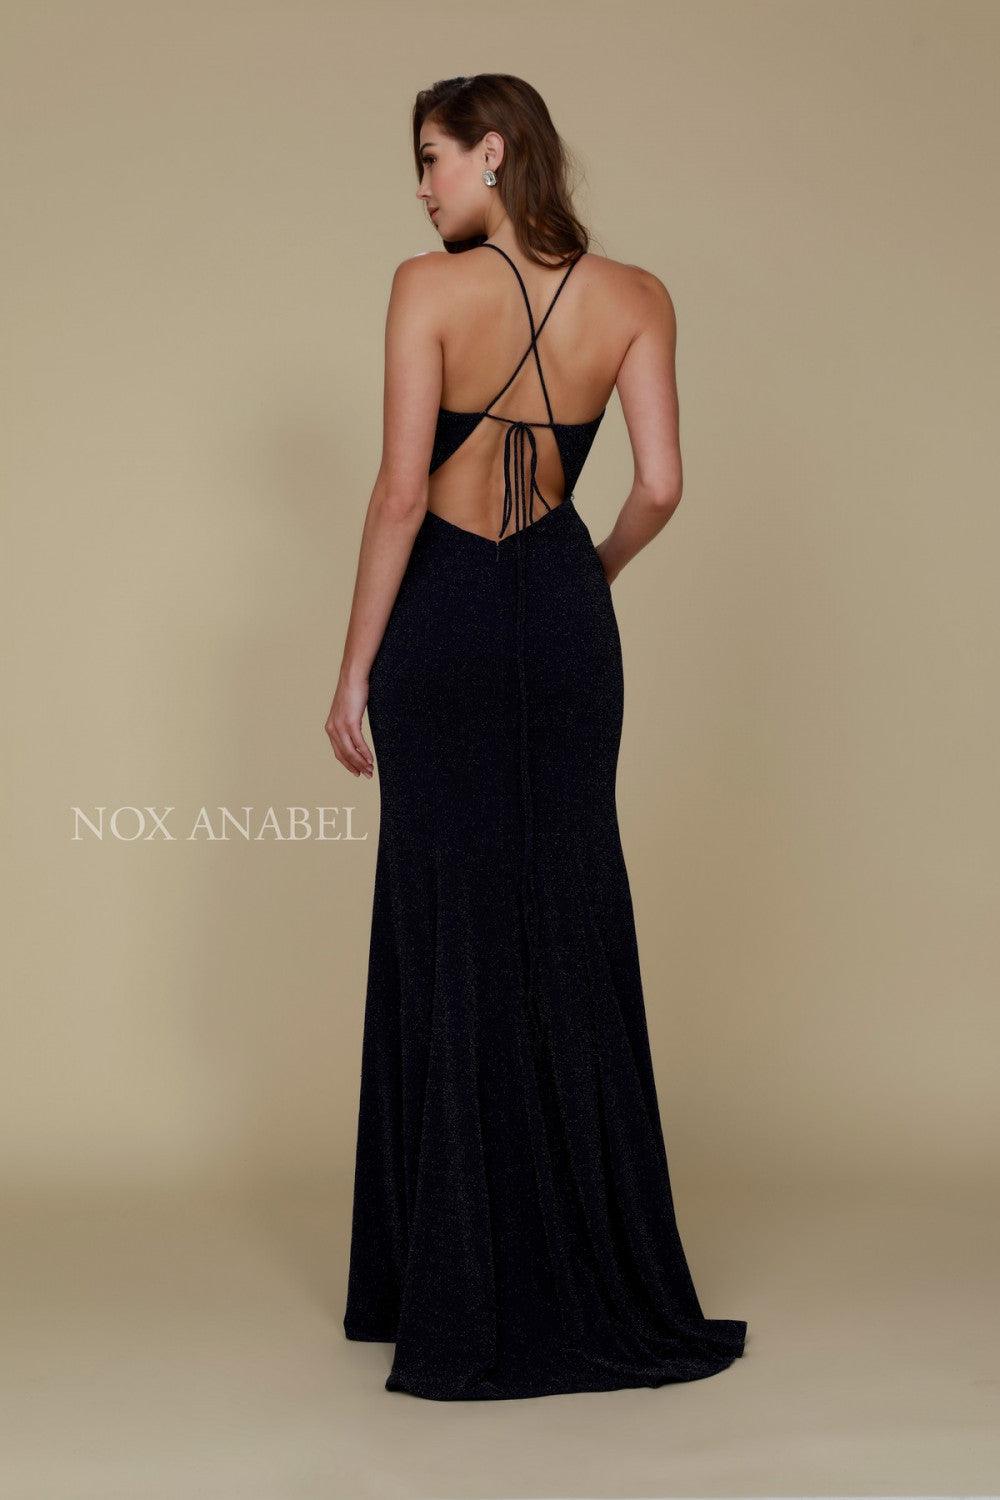 Long Open Back Prom Dress Formal Evening Gown - The Dress Outlet Nox Anabel